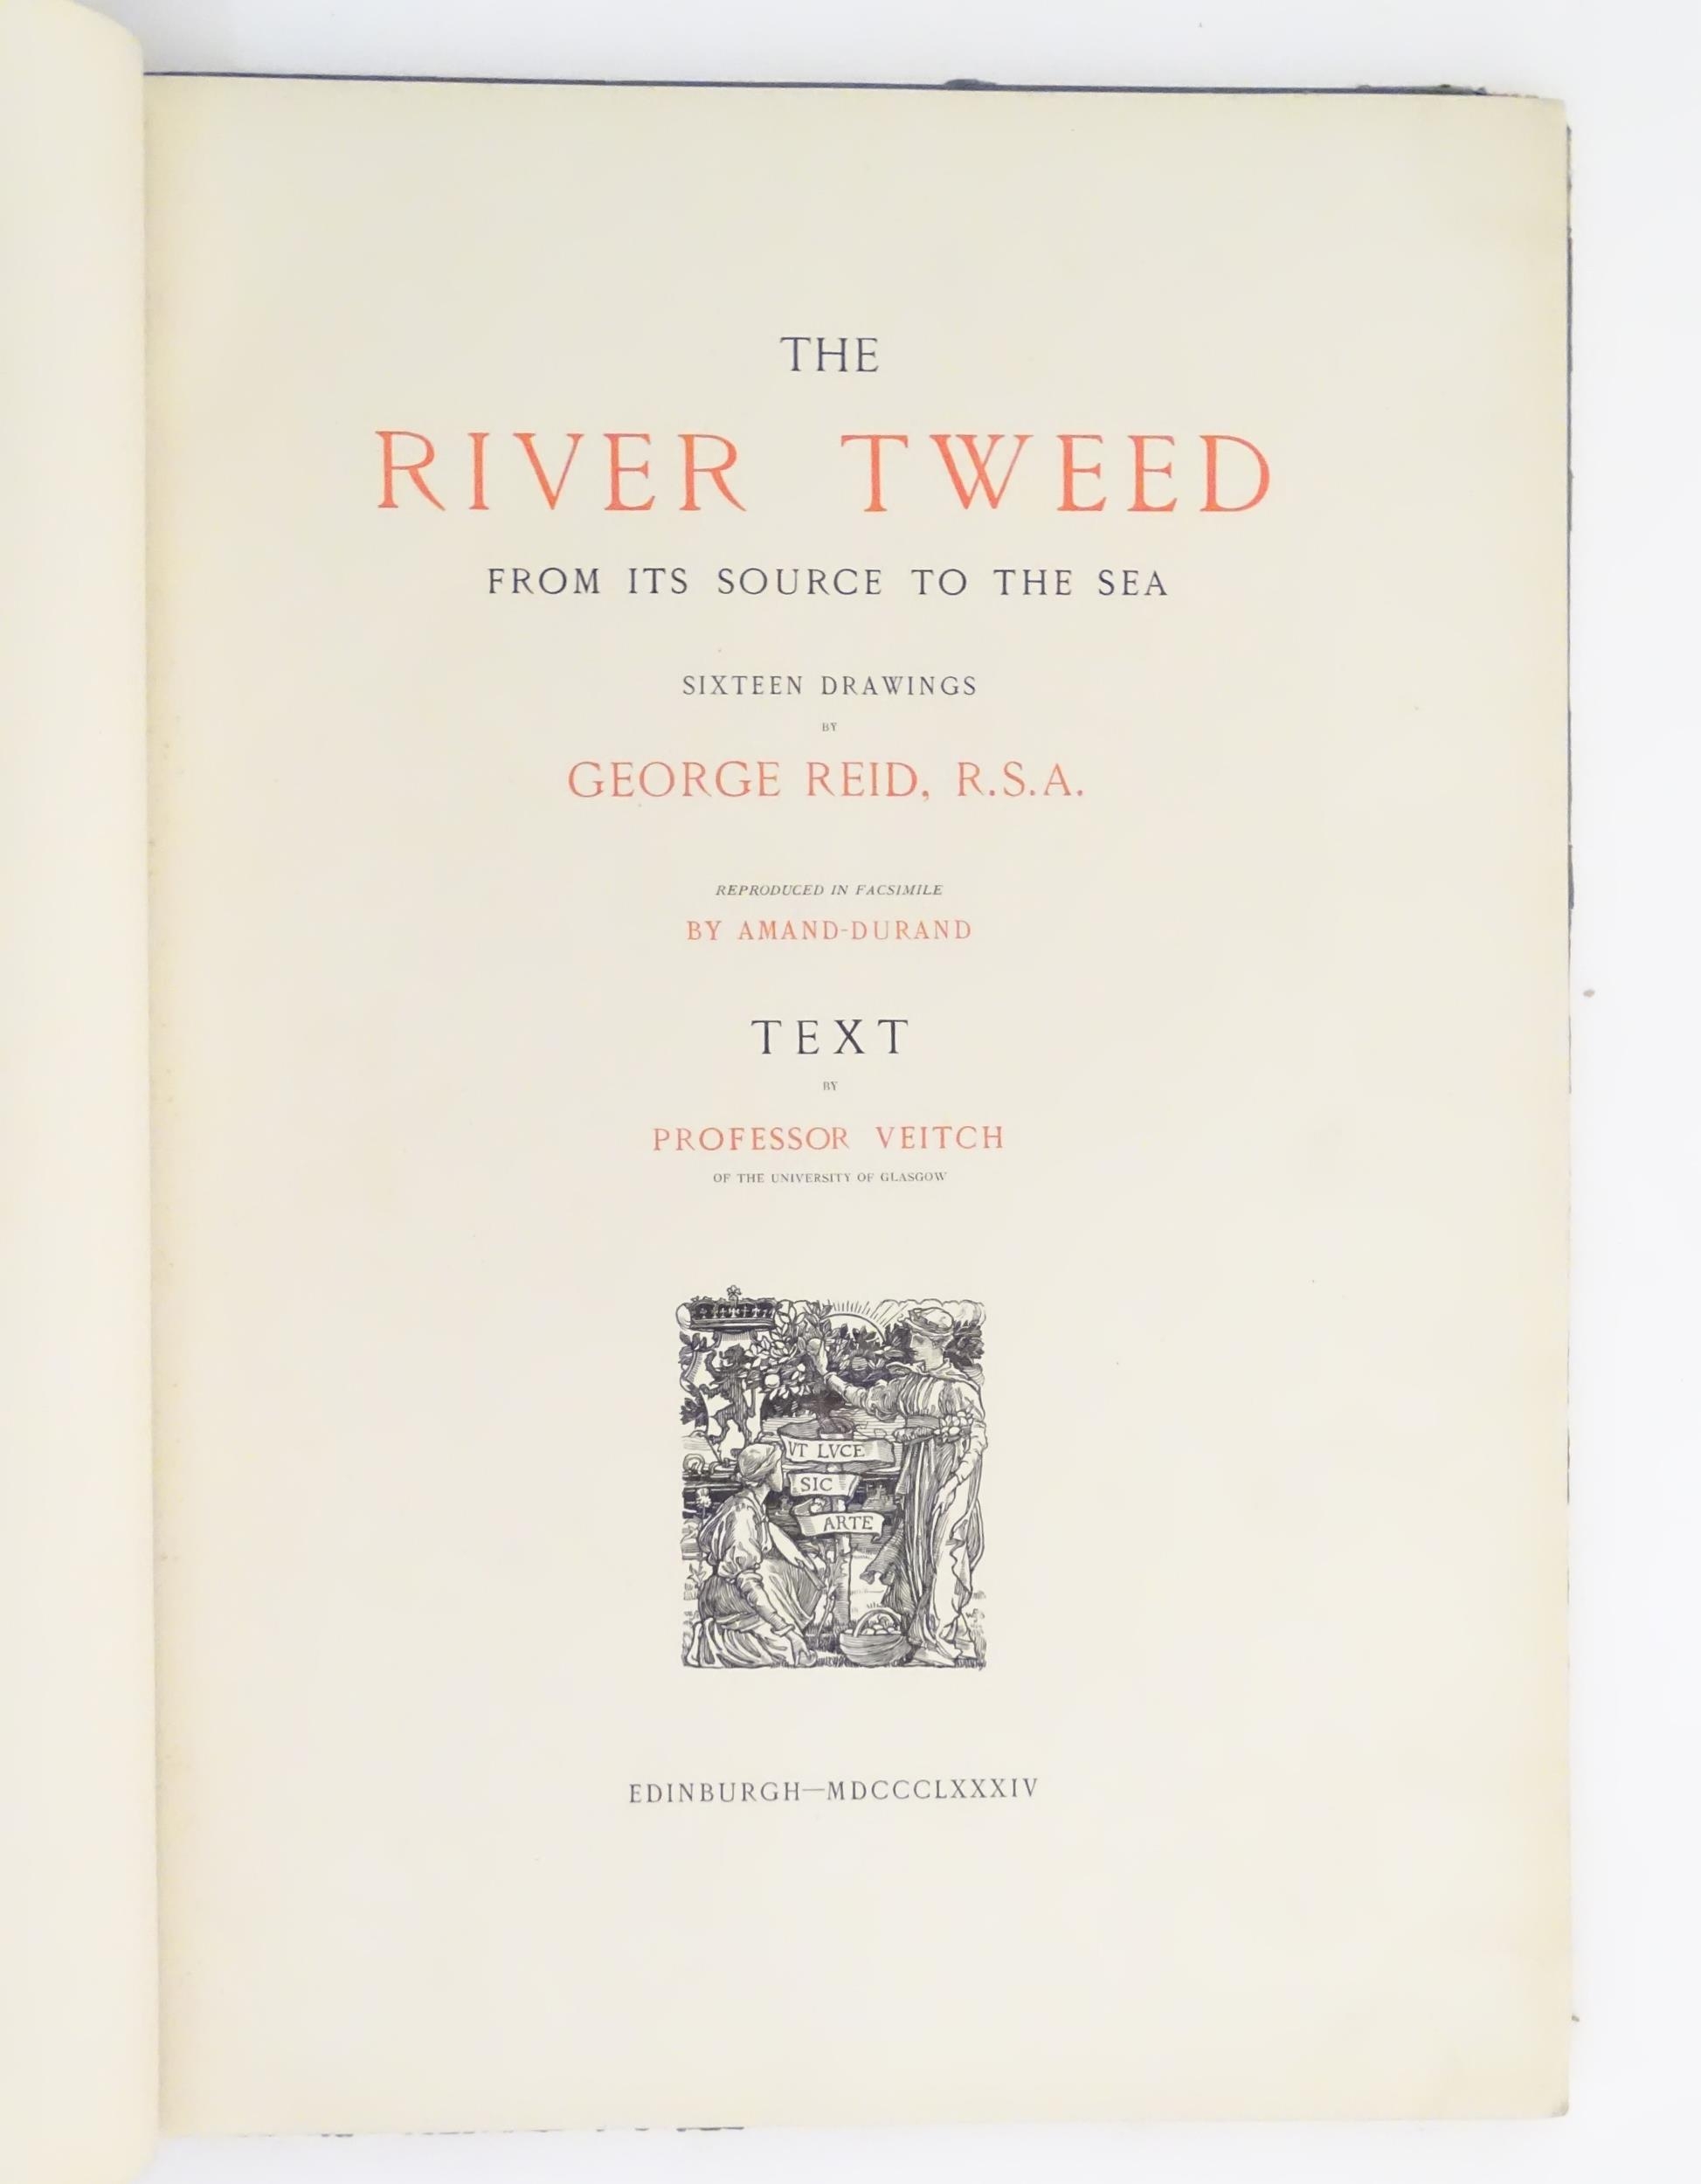 Book: The River Tweed - From its source to the sea, by Professor Veitch, with illustrations by - Image 11 of 11